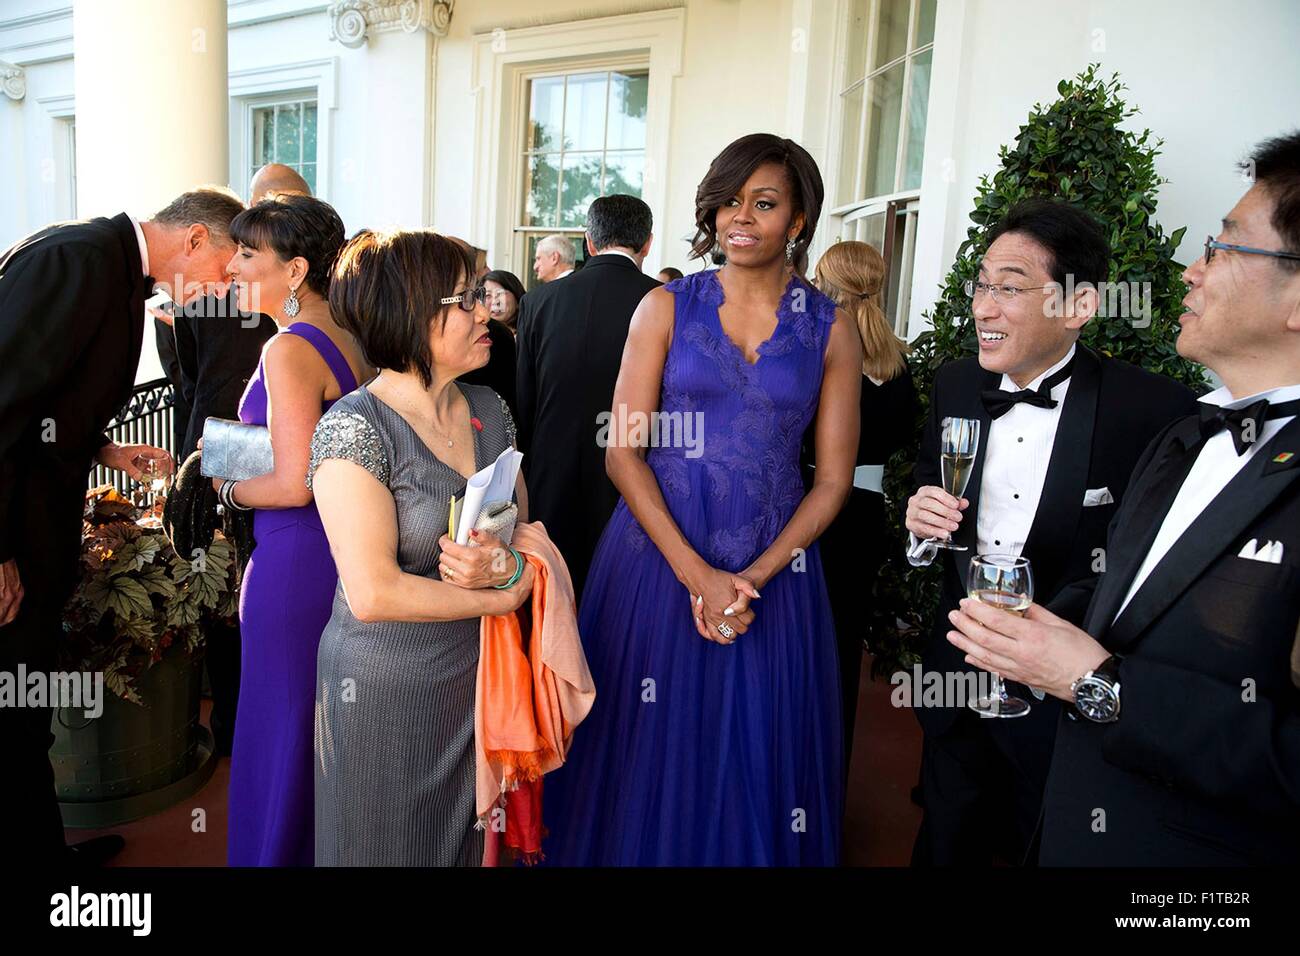 U.S. President Barack Obama and First Lady Michelle Obama host a reception for Prime Minister Shinzo Abe of Japan and First Lady Akie Abe on the Truman Balcony of the White House prior to the State Dinner April 28, 2015 in Washington, DC. Stock Photo